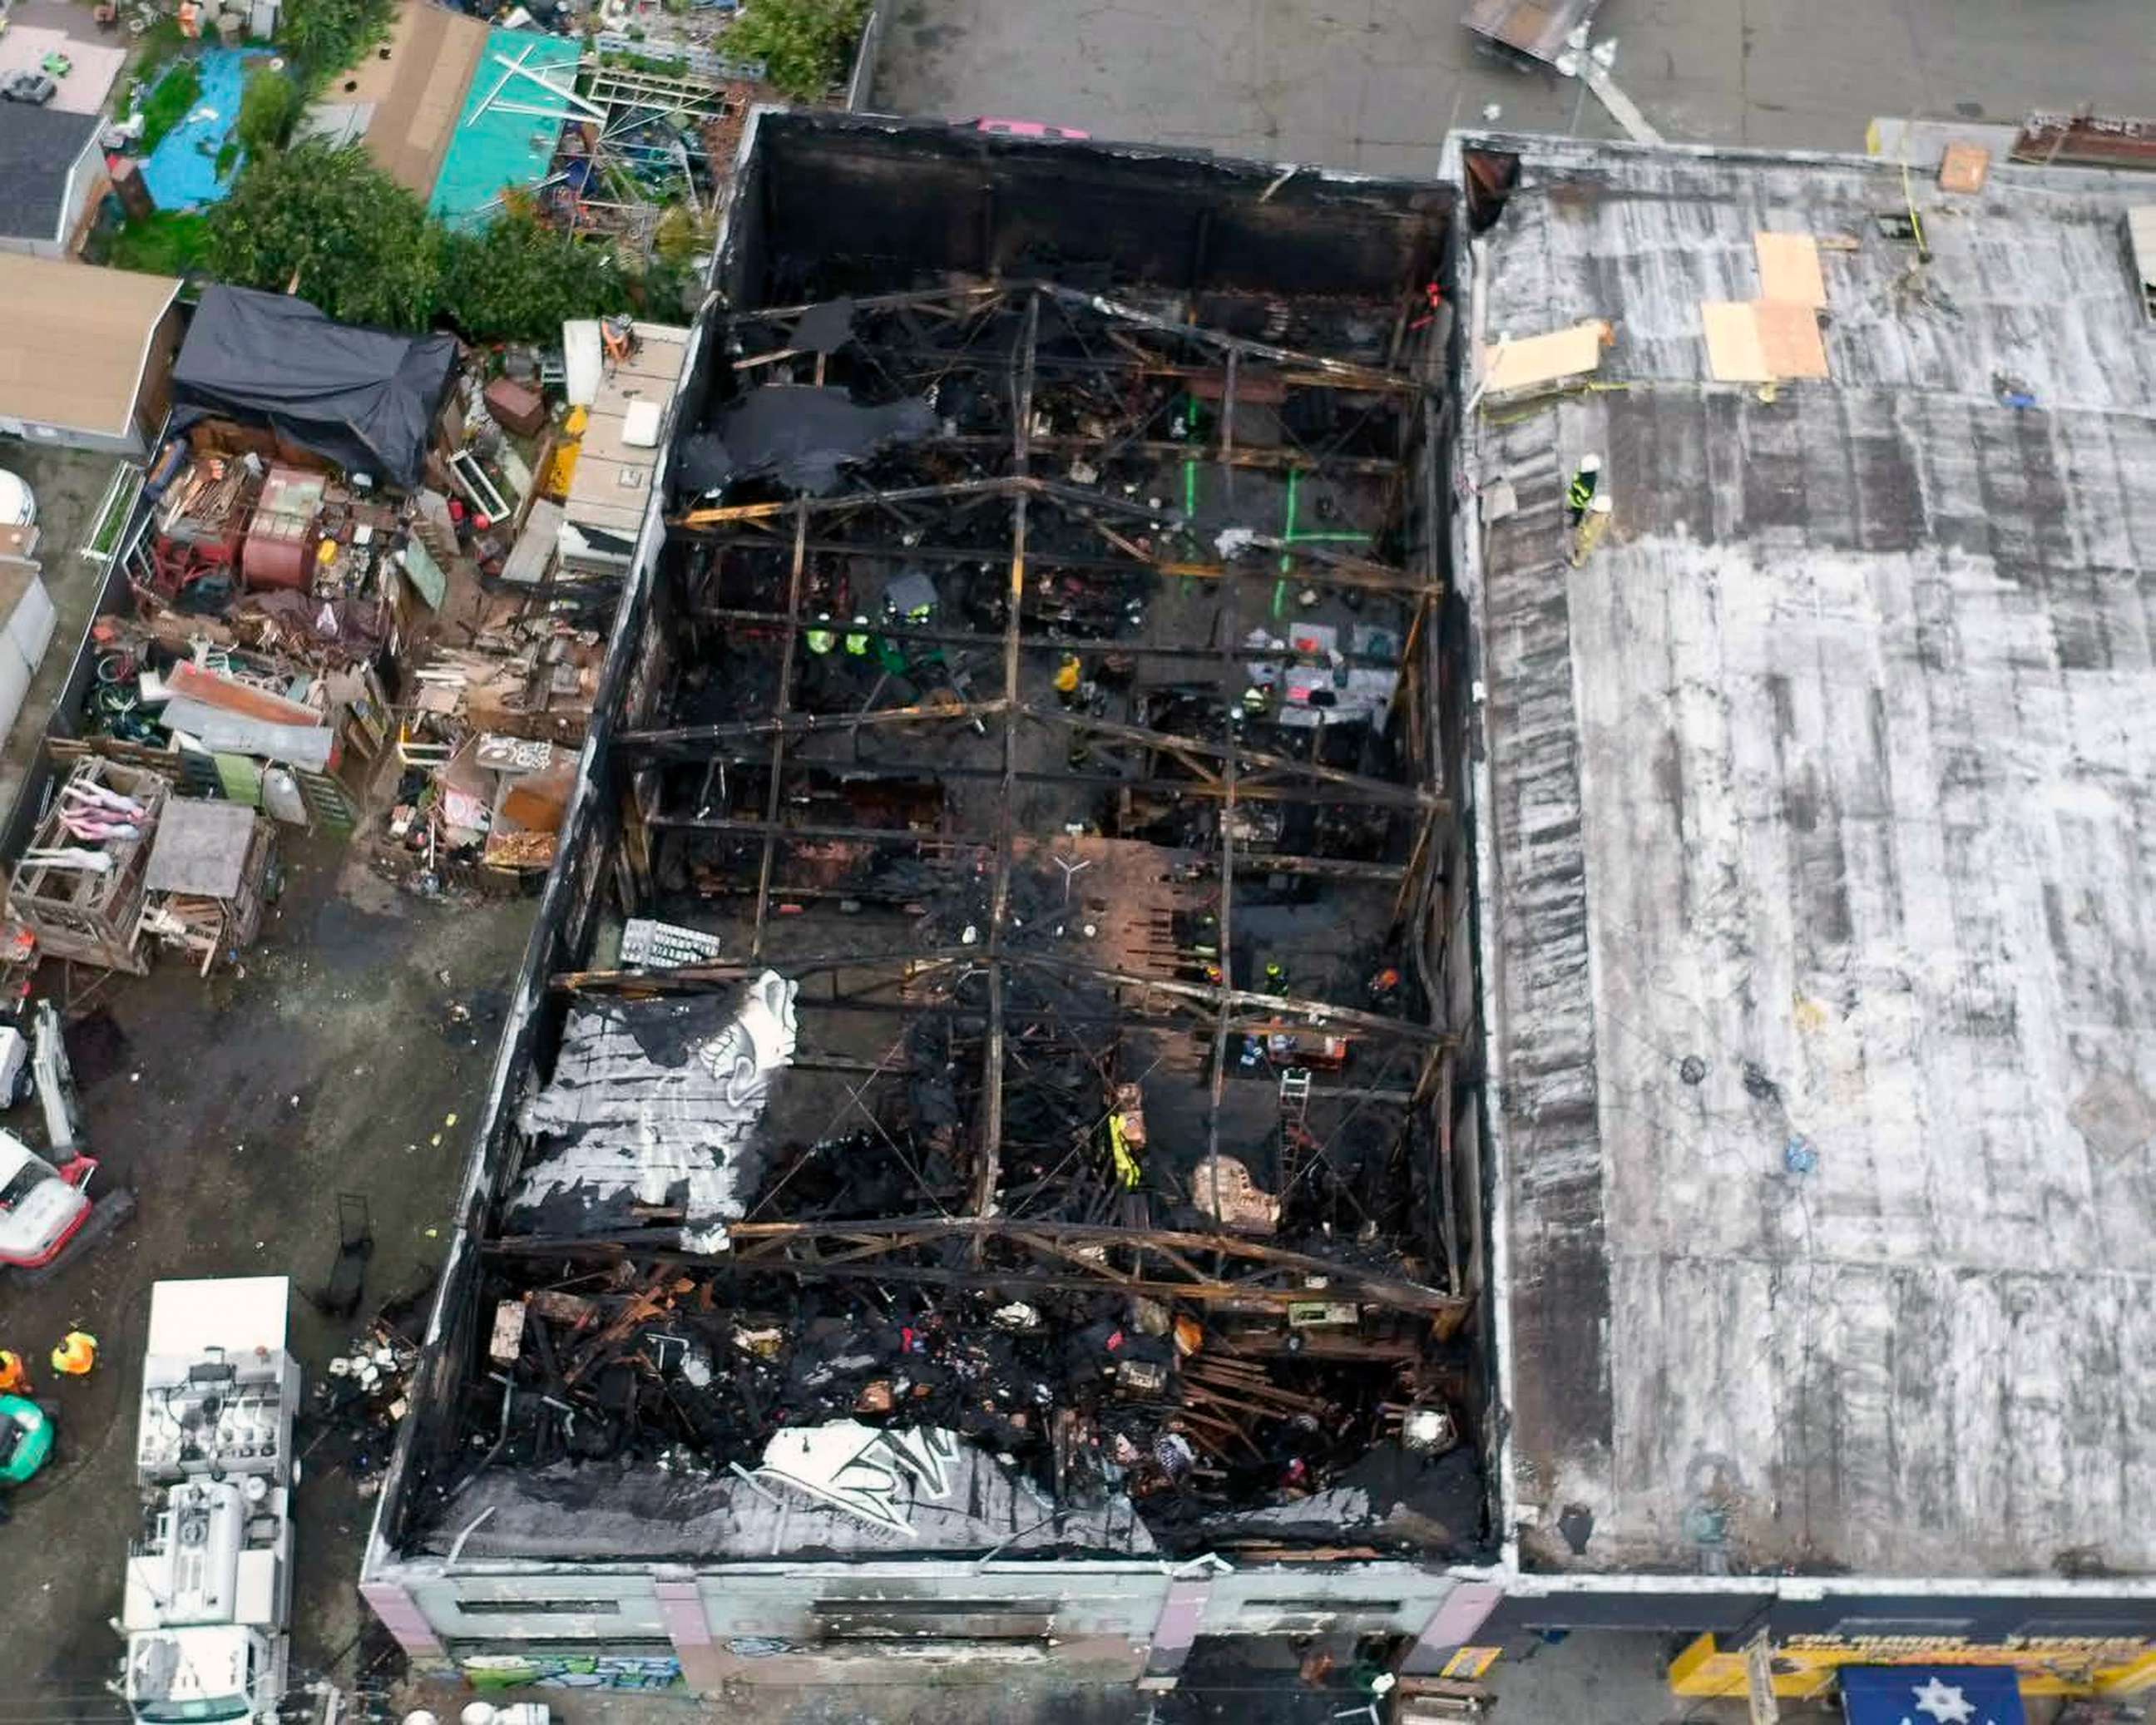 PHOTO: In this Dec. 6, 2016, file photo provided by the City of Oakland shows inside the burned warehouse after the deadly fire that broke out in Oakland, Calif.